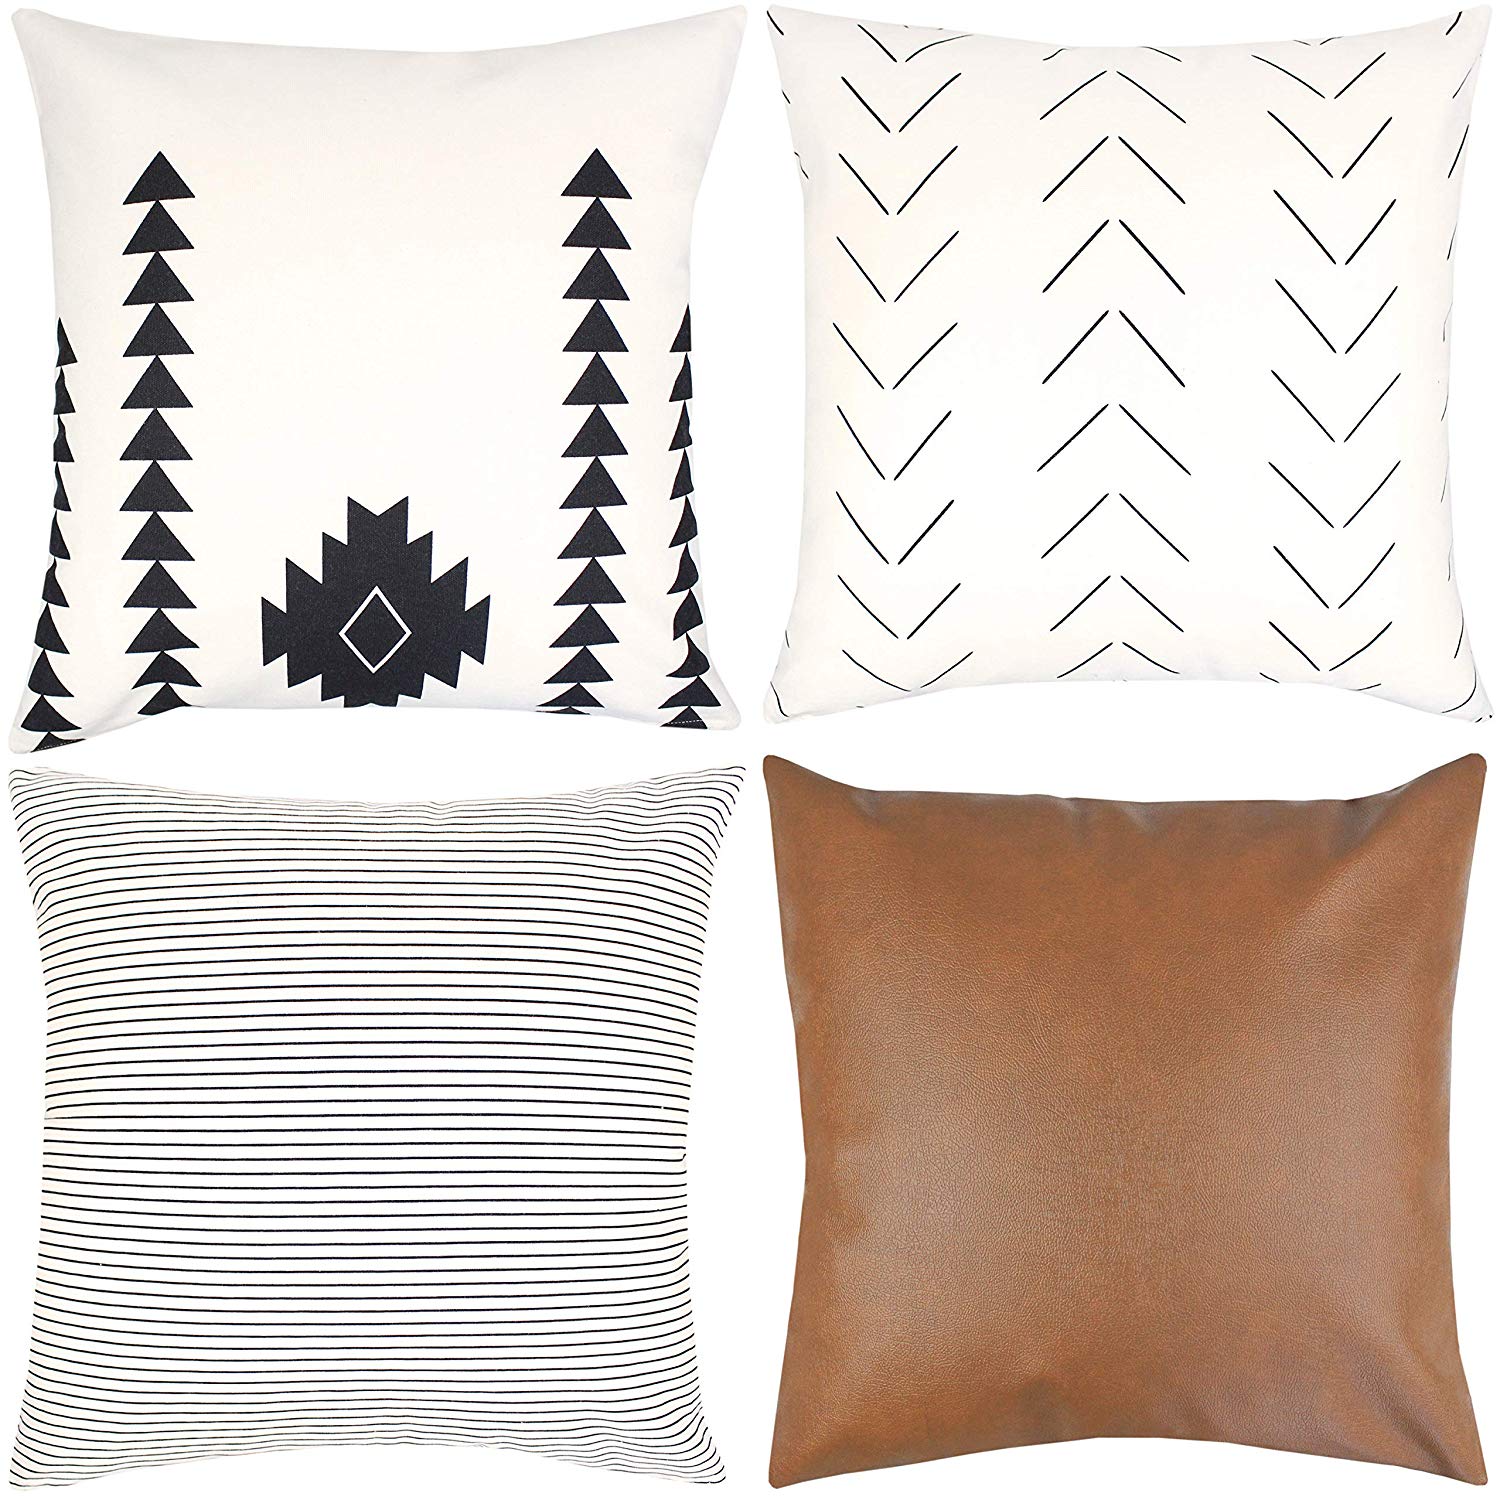 throw pillow covers that are neutral and easy to store